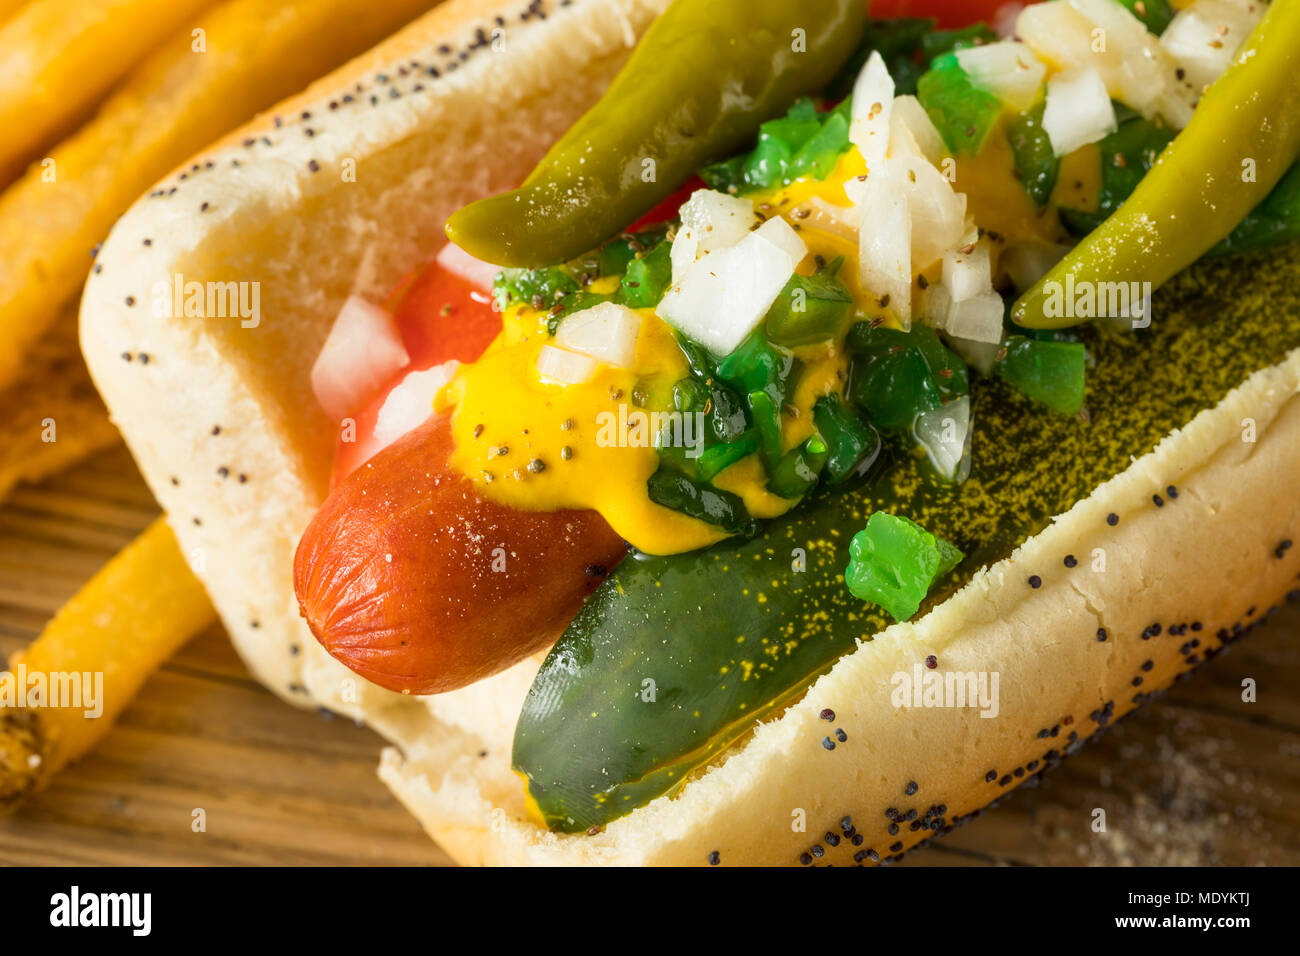 https://c8.alamy.com/comp/MDYKTJ/homemade-chicago-style-hot-dog-with-mustard-pickles-relish-tomato-and-peppers-MDYKTJ.jpg